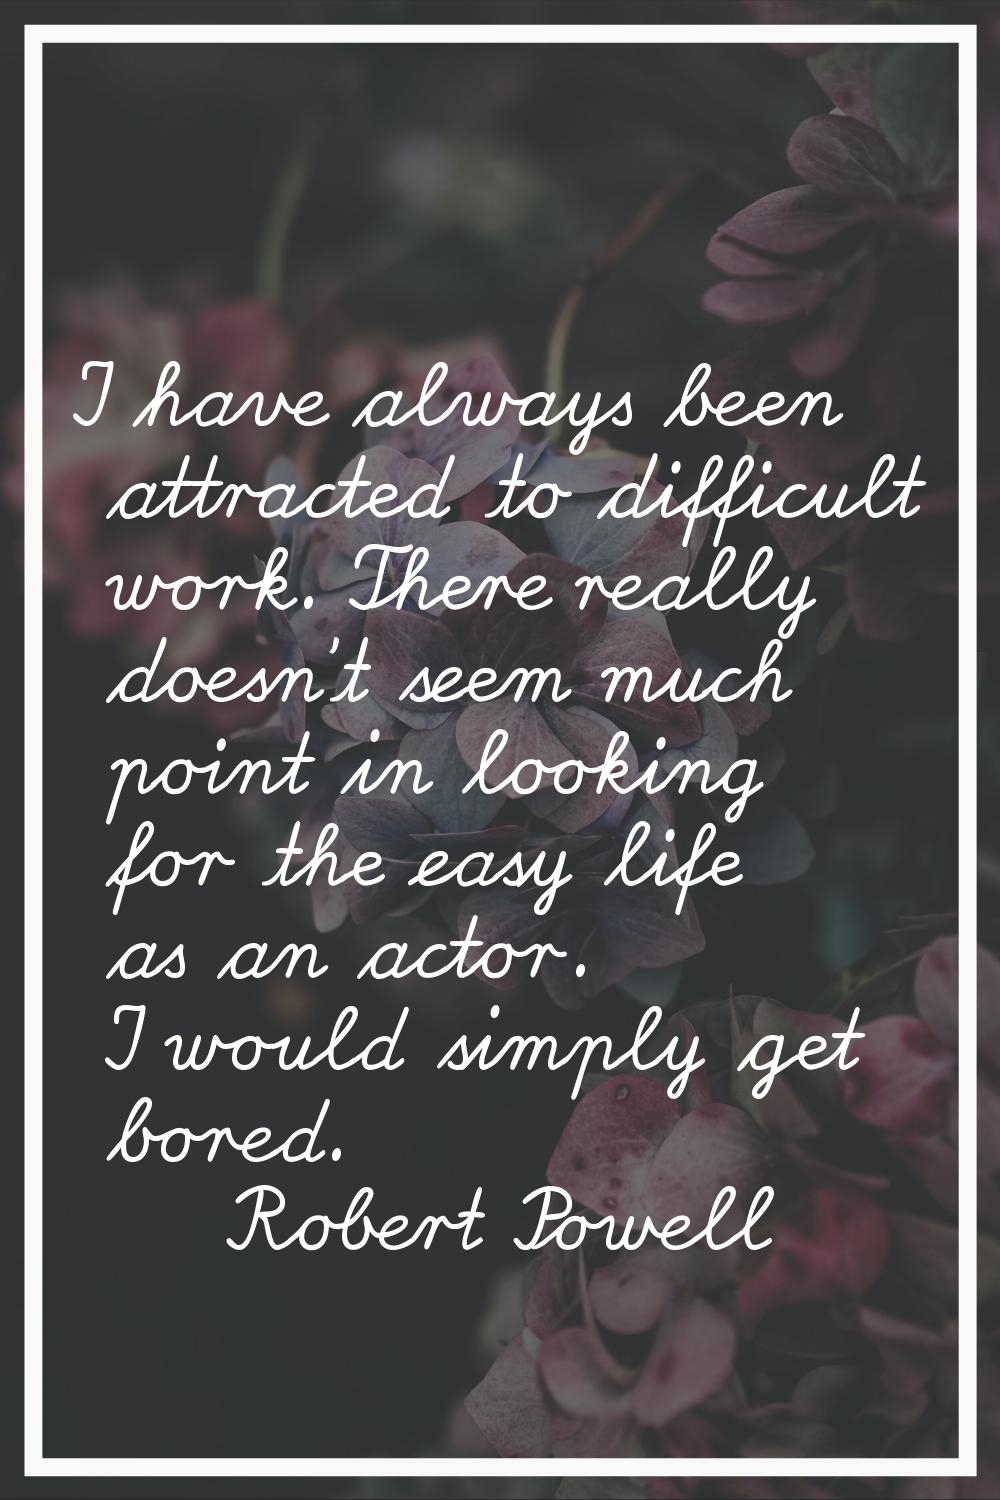 I have always been attracted to difficult work. There really doesn't seem much point in looking for